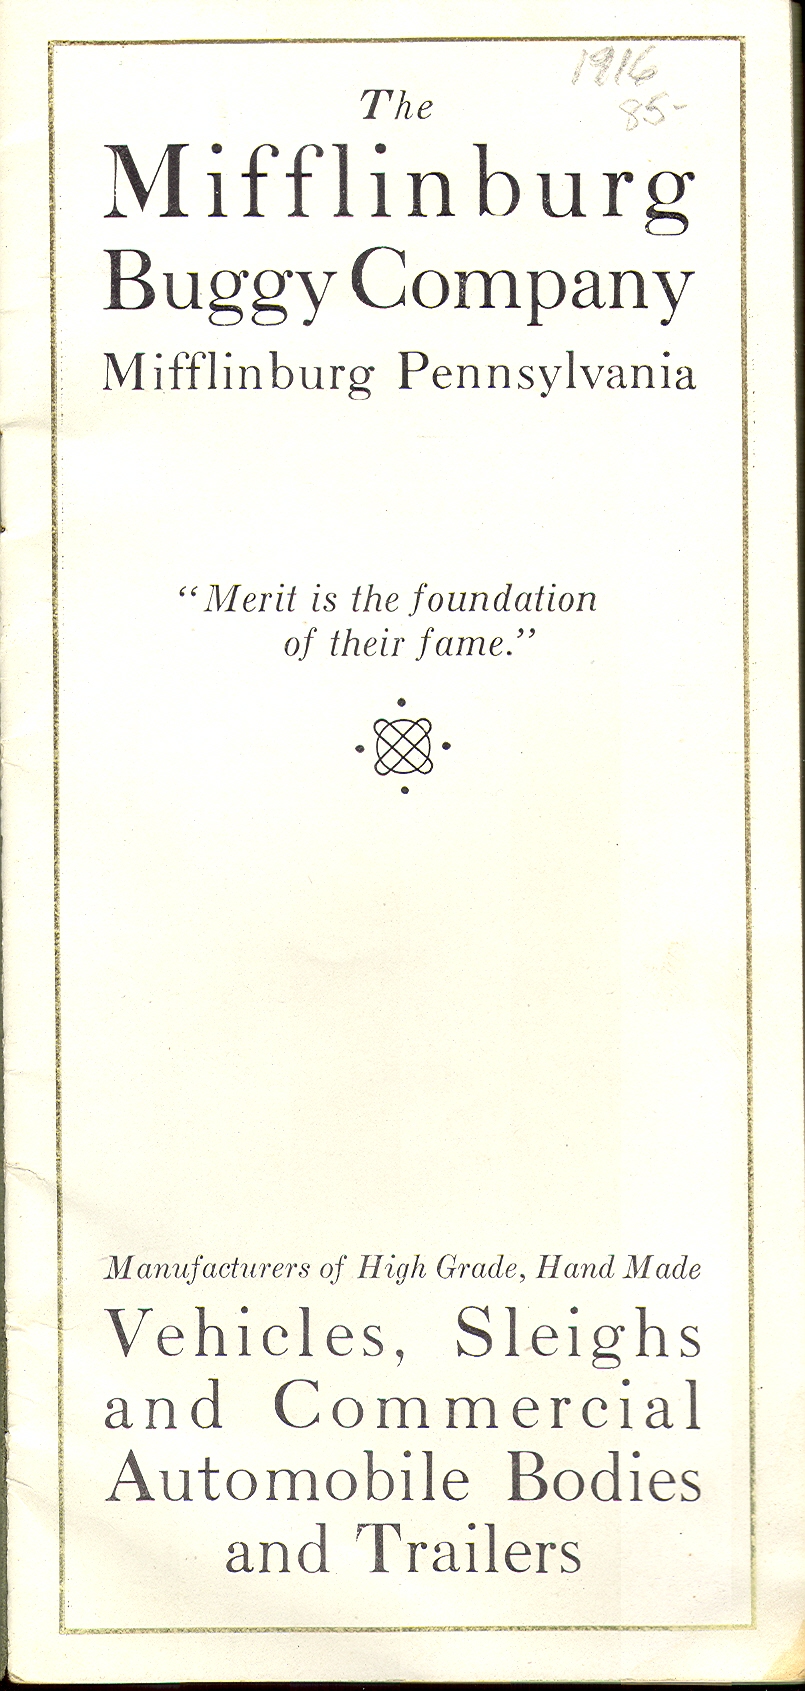 Title page of un-numbered catalog